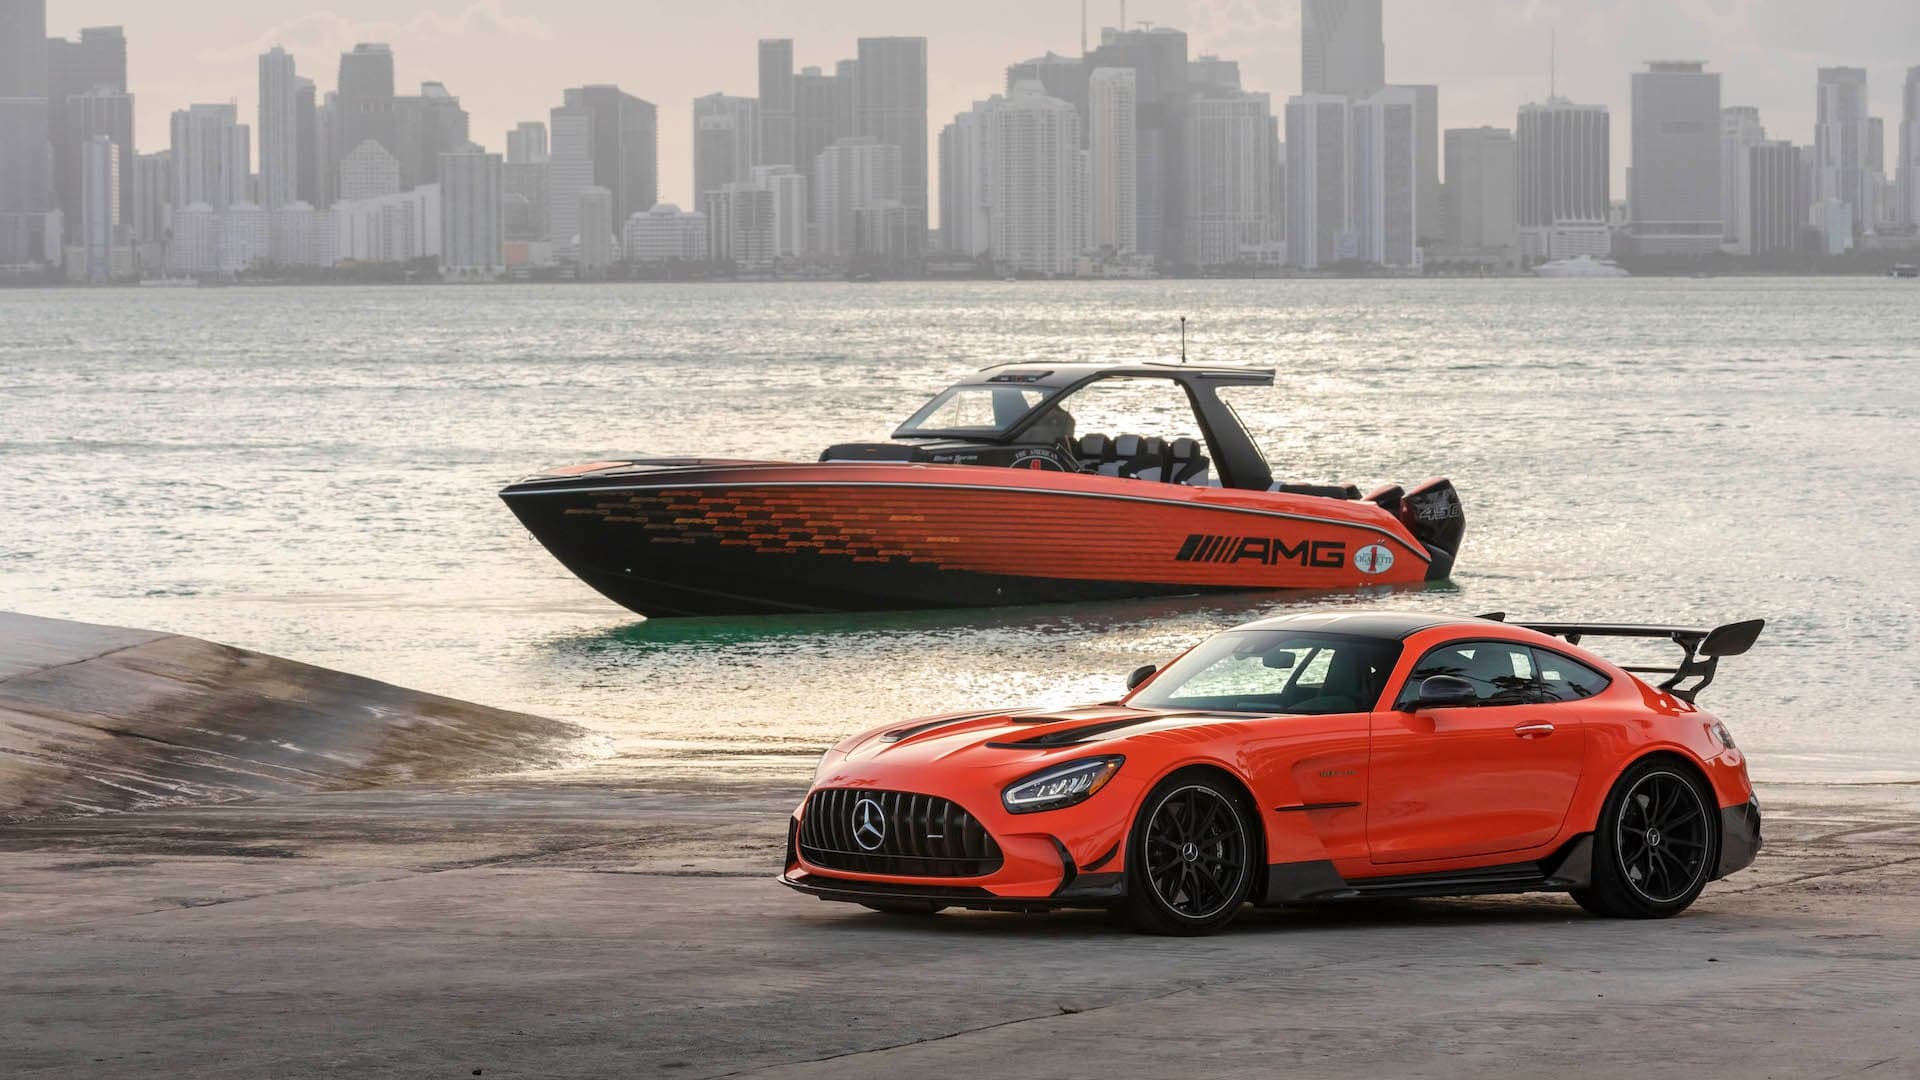 The 2,250-HP Cigarette 41′ Nighthawk Boat Is an AMG Black Series for the Water